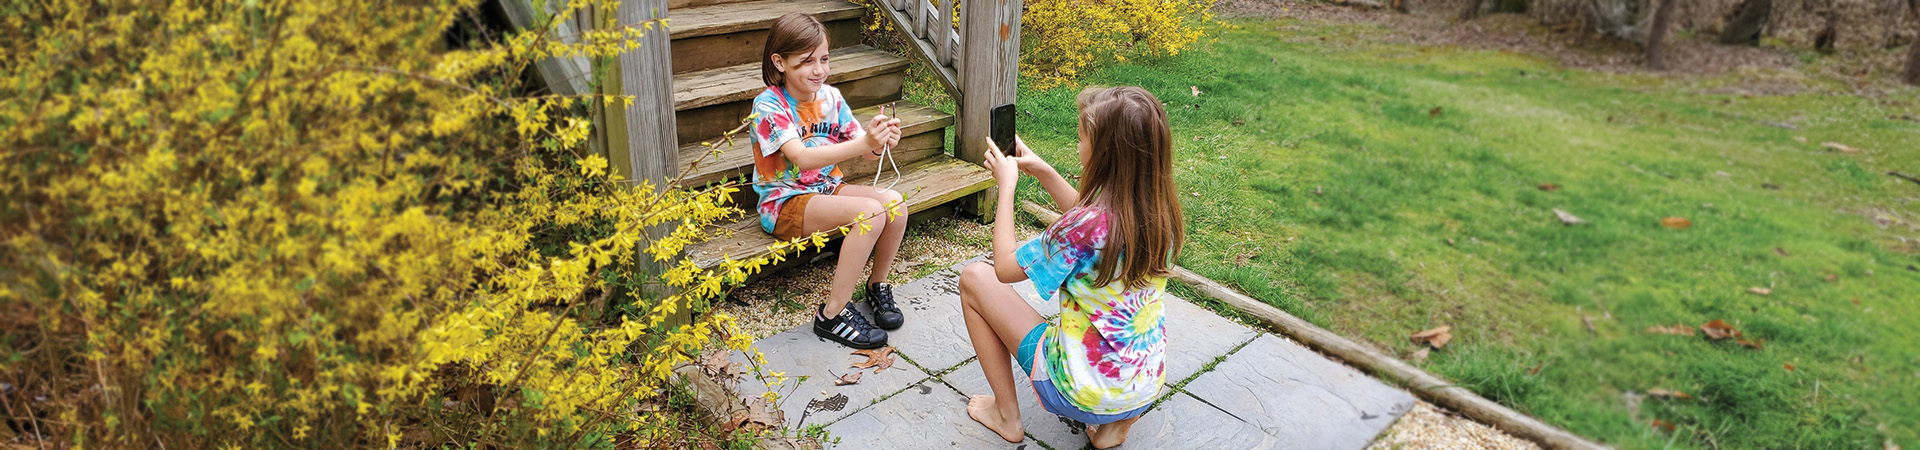  two girls in tie dye shirts filming a video about how to tie a knot 